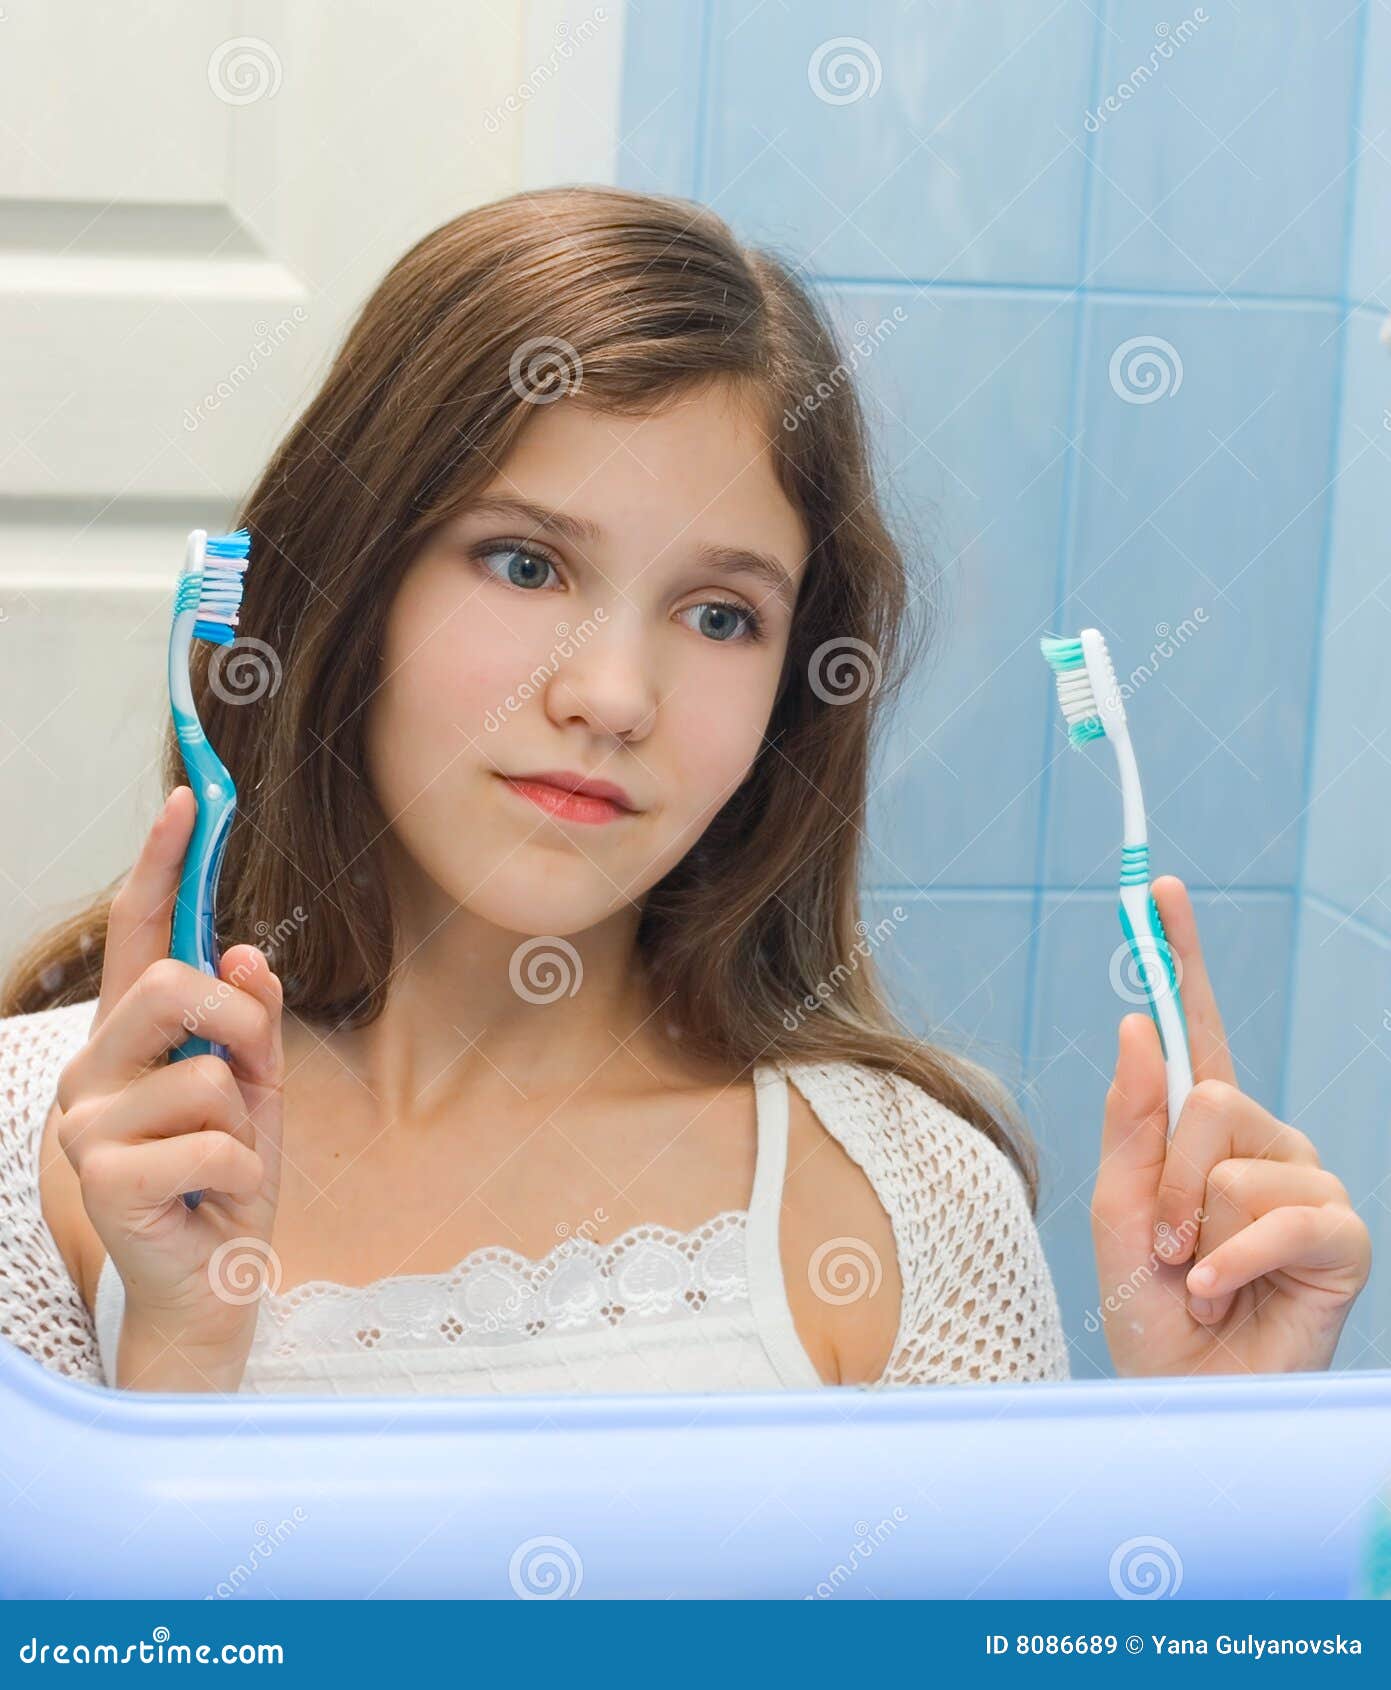 teen girl to decide between the two toothbrushes